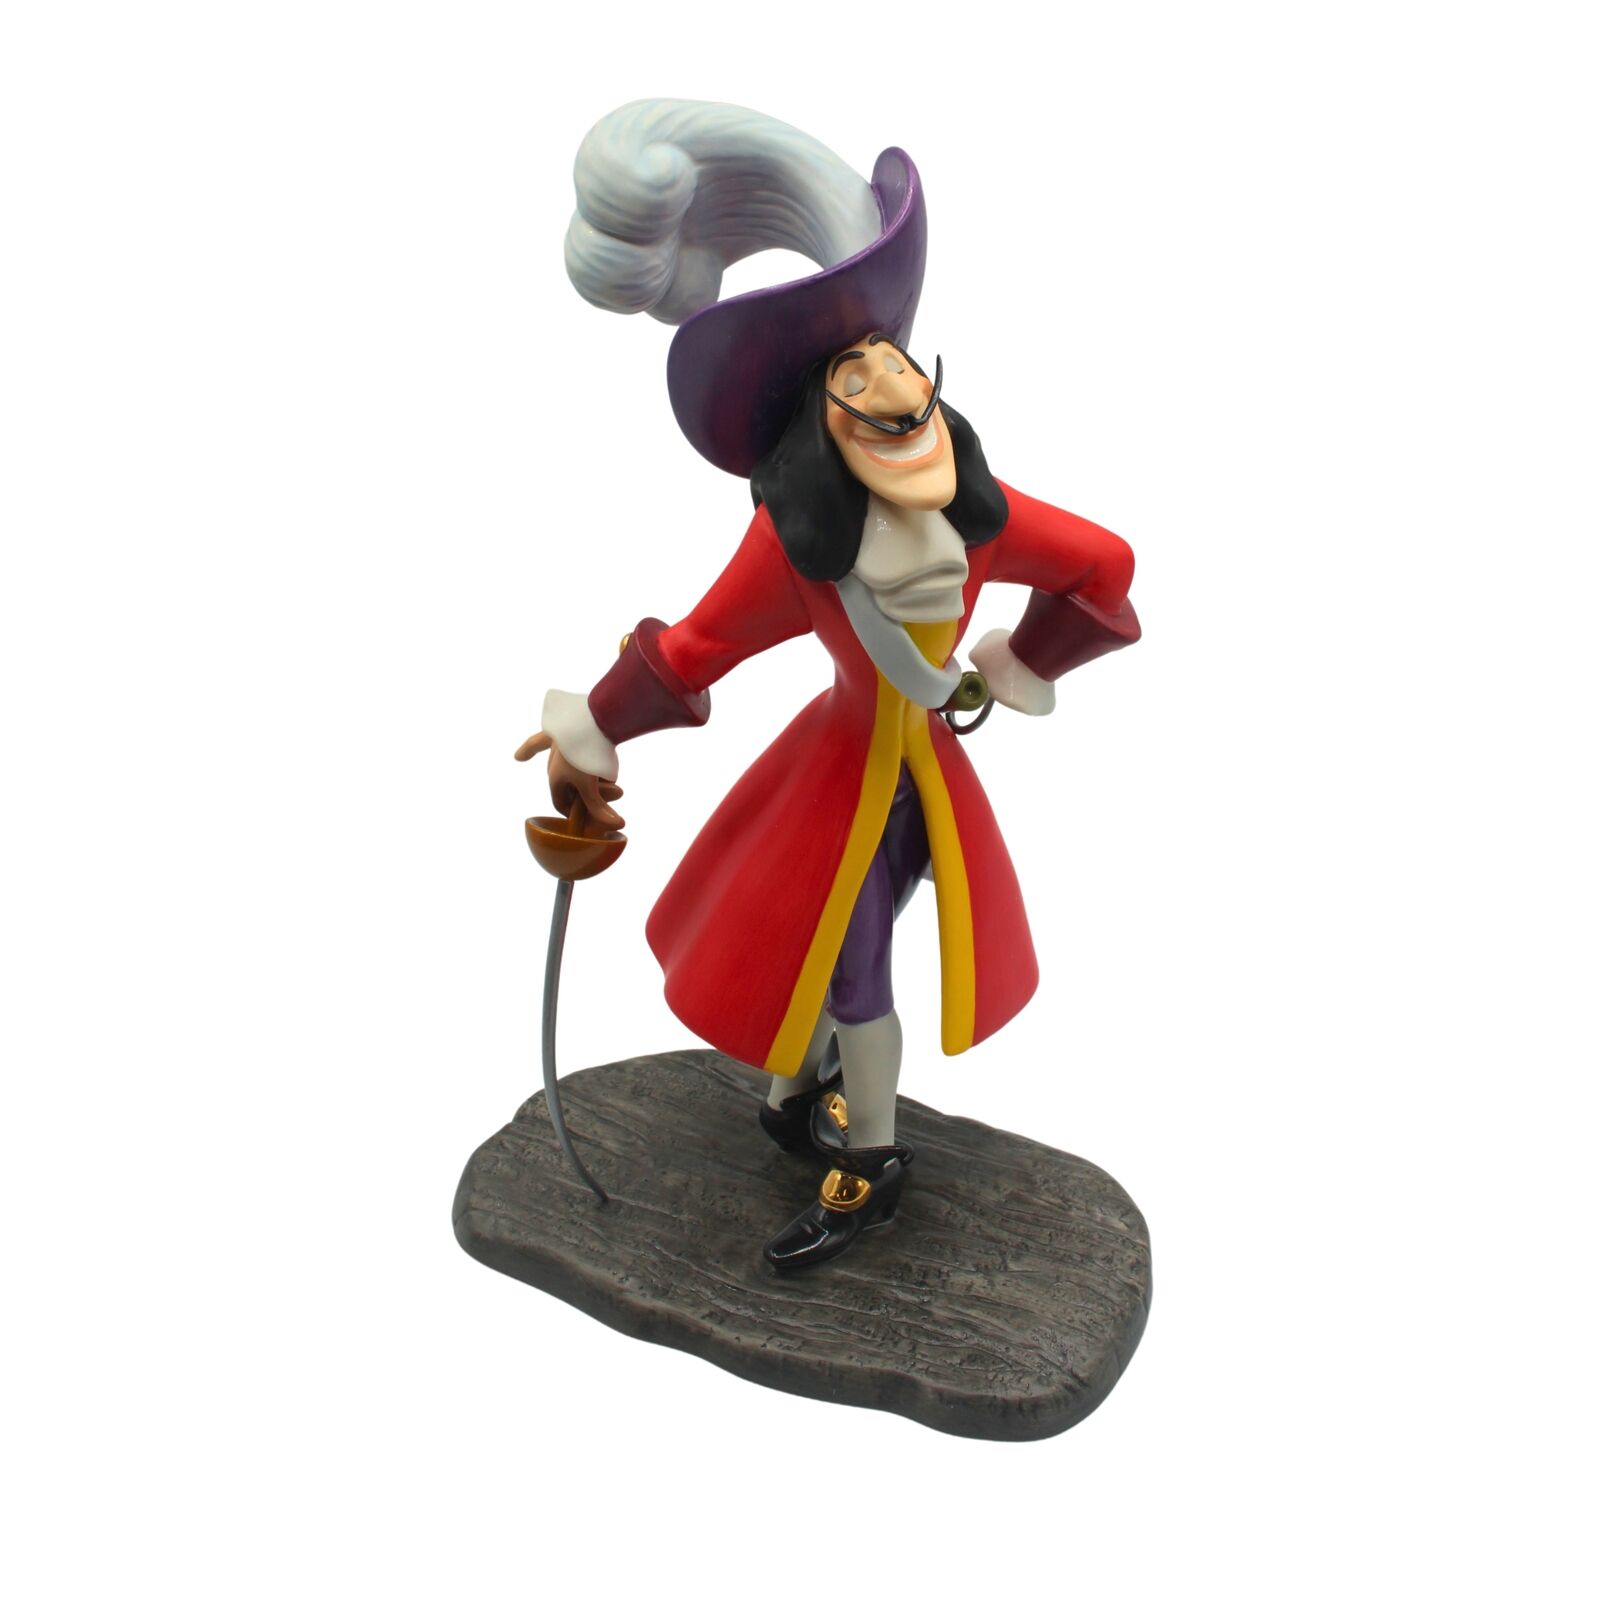 WDCC Captain Hook - Silver-Tongued Scoundrel | Limited to 5000 | New in Box